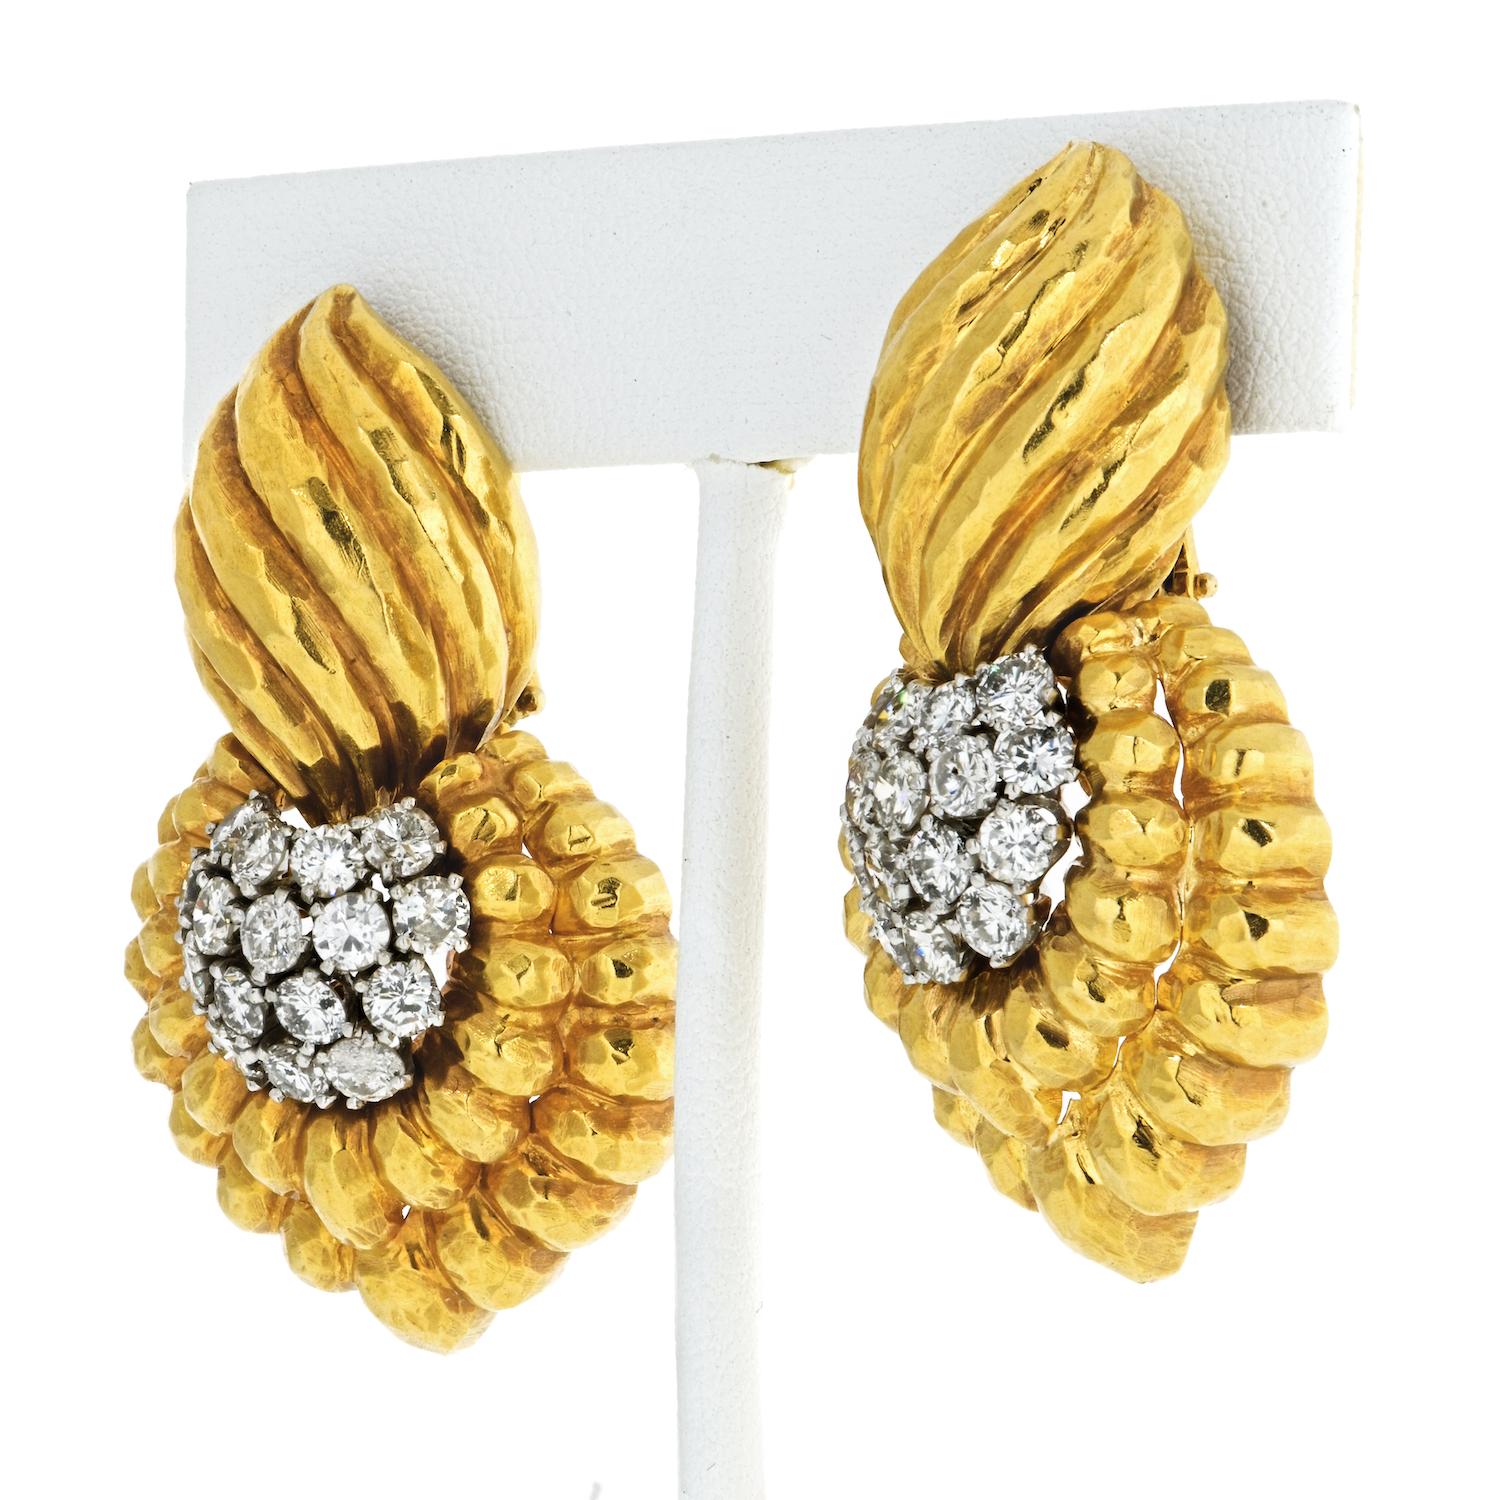 Brilliant-cut diamonds, hammered 18K gold, and platinum

Substantial door knocker earrings by David Webb is the ultimate luxury in your jewelry box. Loud statement on your ears, with texture and vintage grace you will be the star of the show. 

The